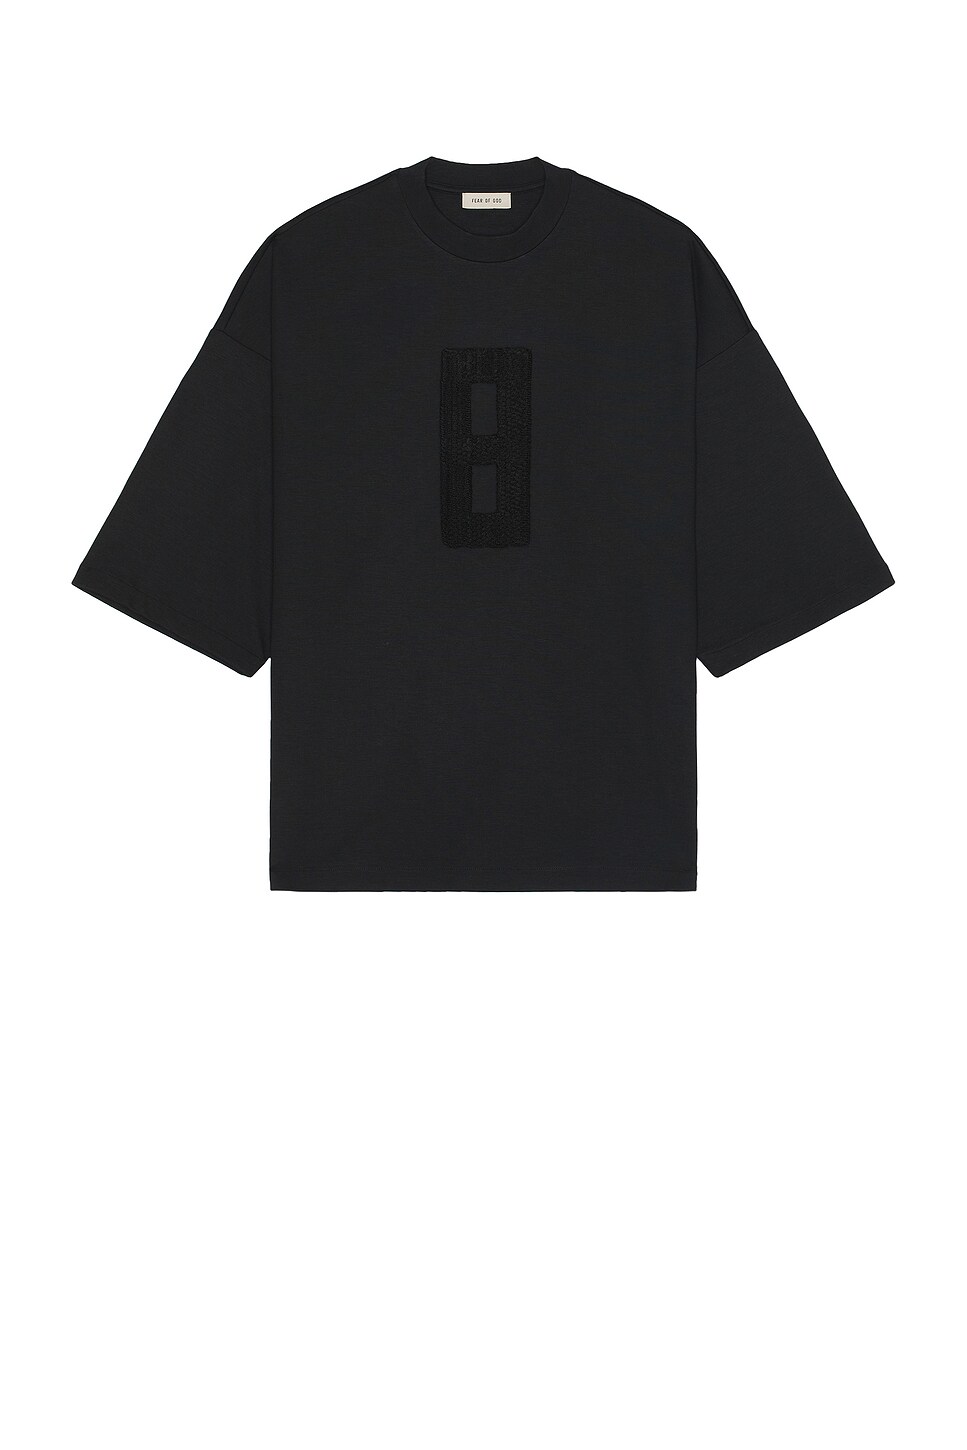 Image 1 of Fear of God Embroidered 8 Milano Tee in Black